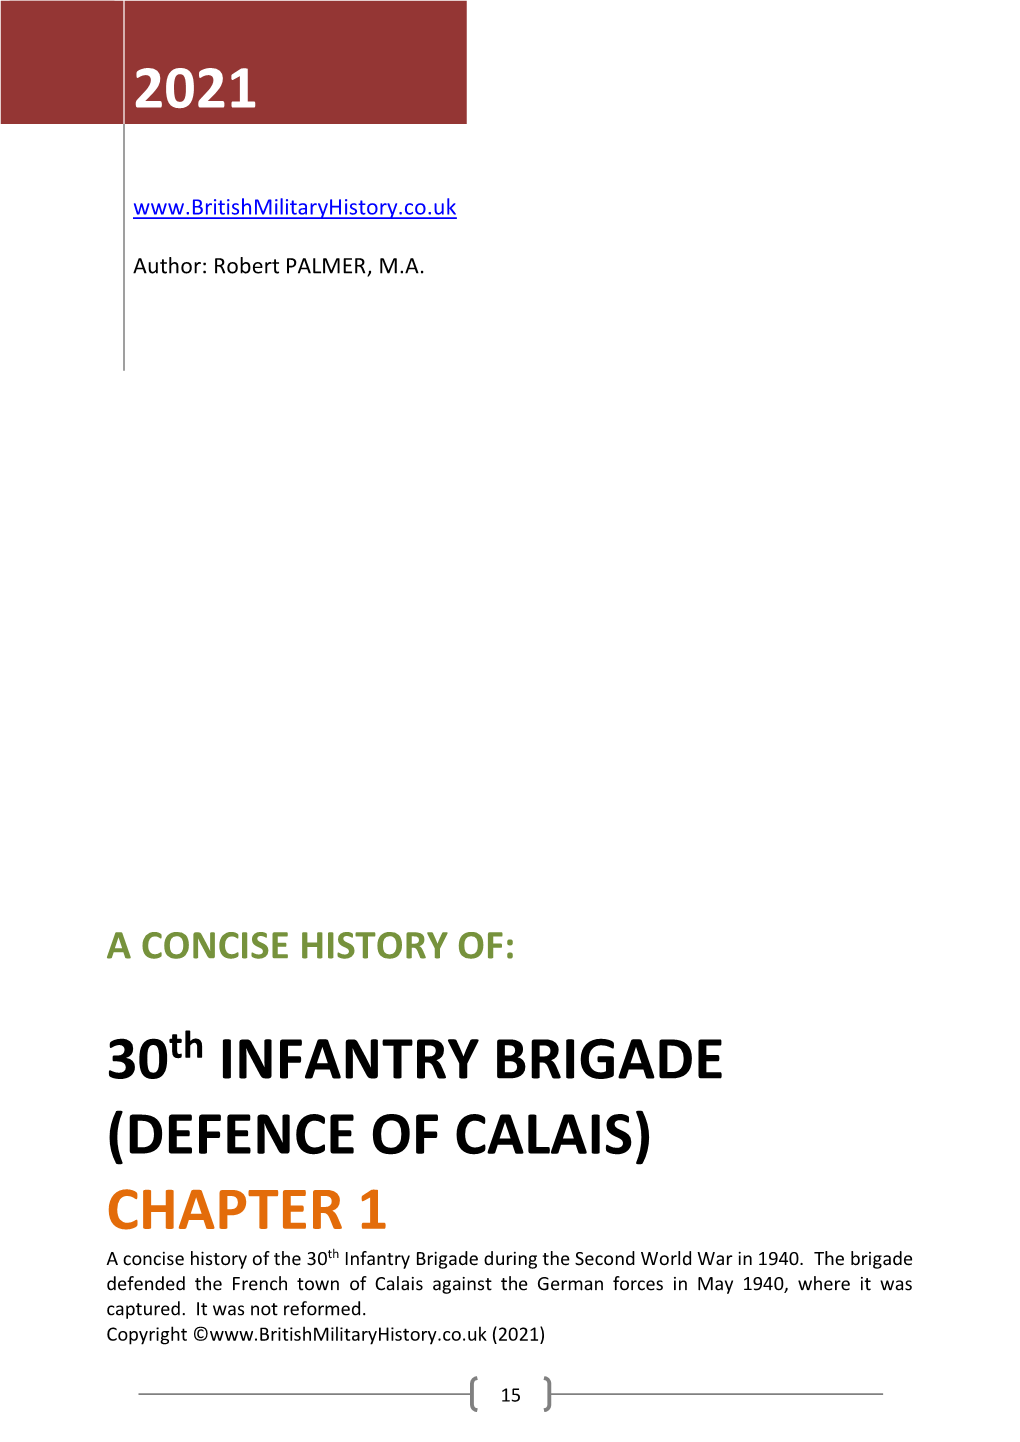 30Th INFANTRY BRIGADE (DEFENCE of CALAIS) CHAPTER 1 a Concise History of the 30Th Infantry Brigade During the Second World War in 1940